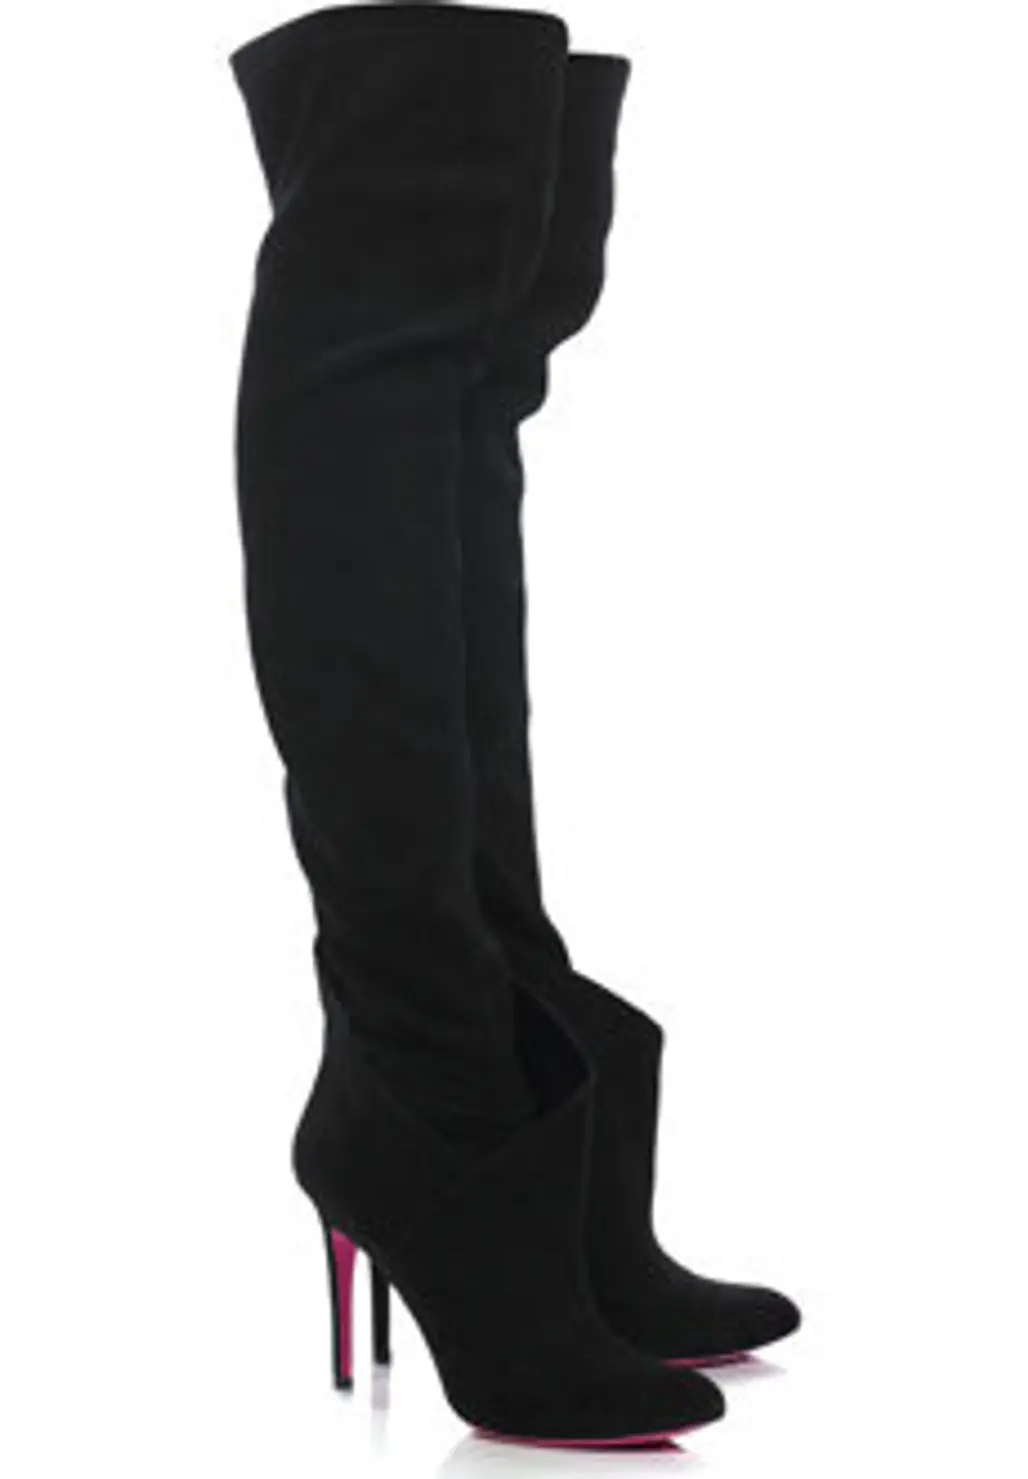 Emanuel Ungaro Suede Stretch Thigh High Boots